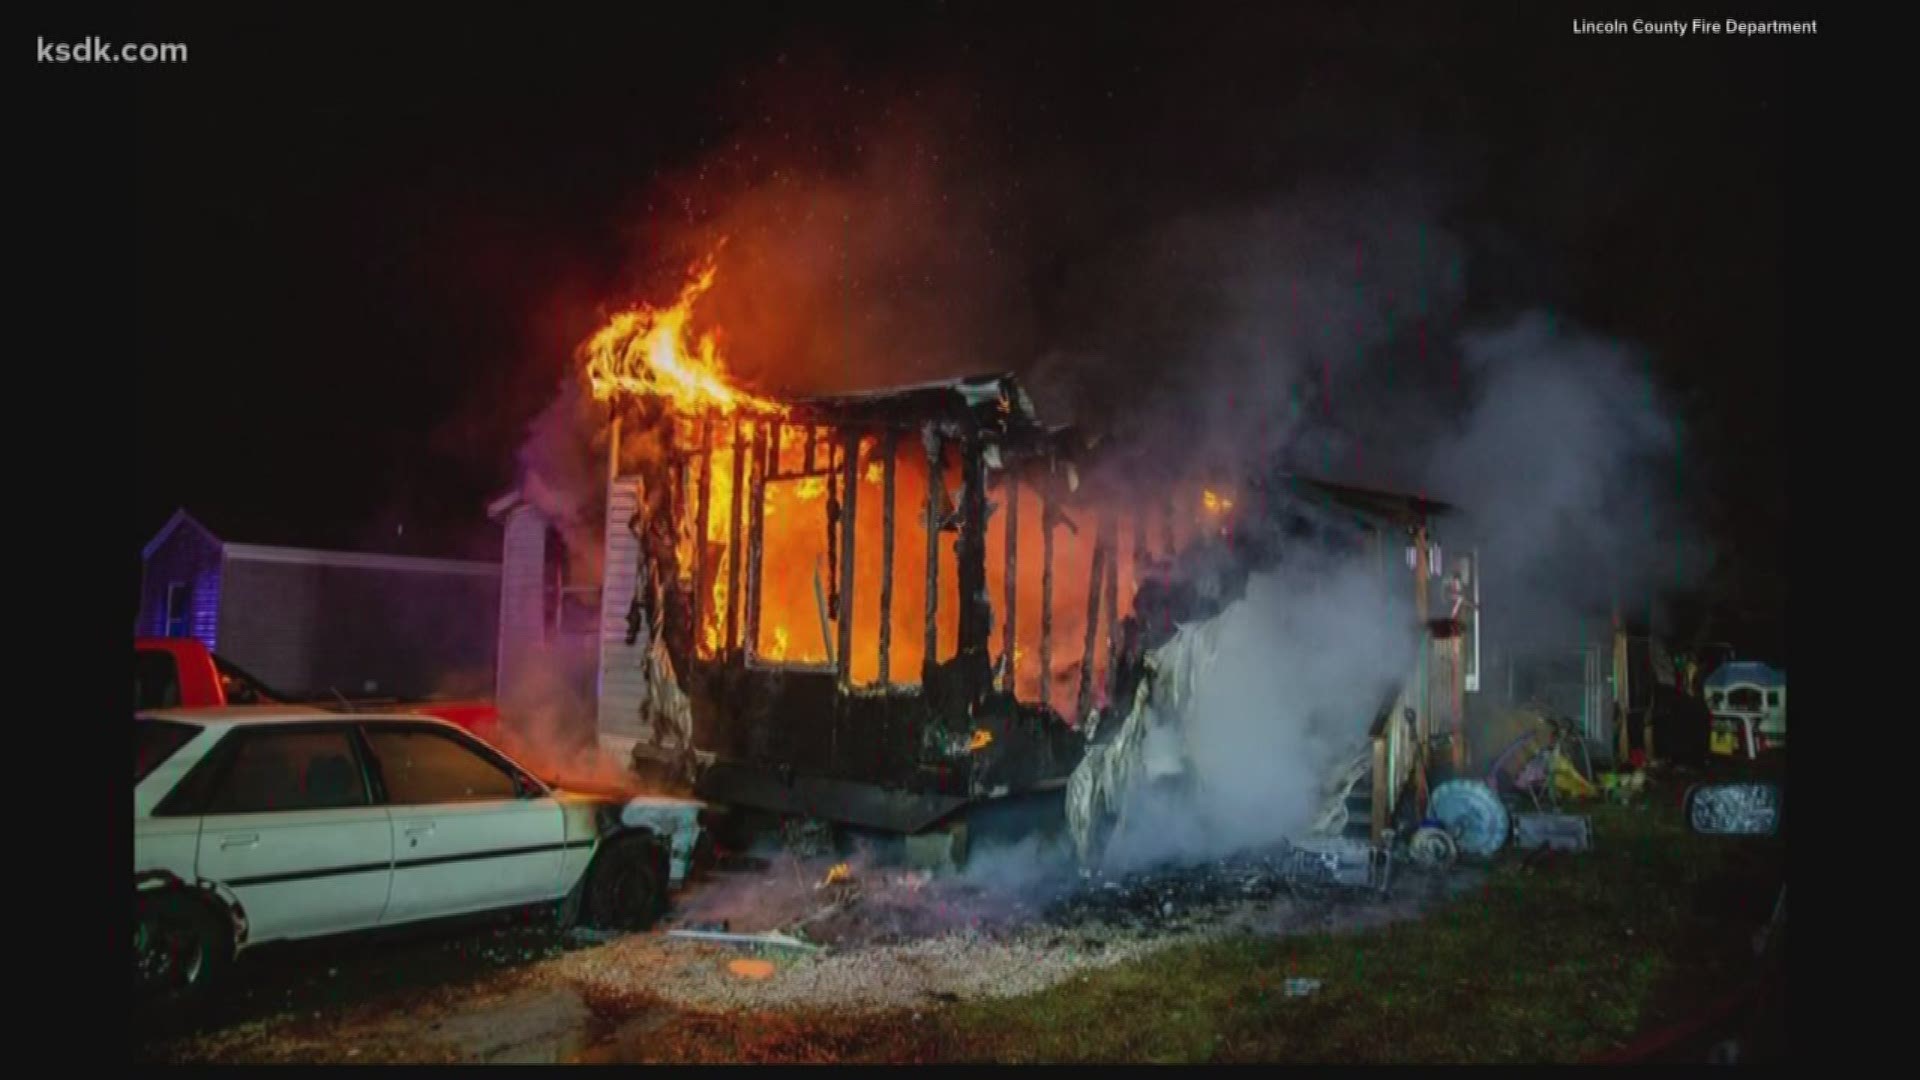 Firefighters said 10 people were in the mobile home at the time of the fire